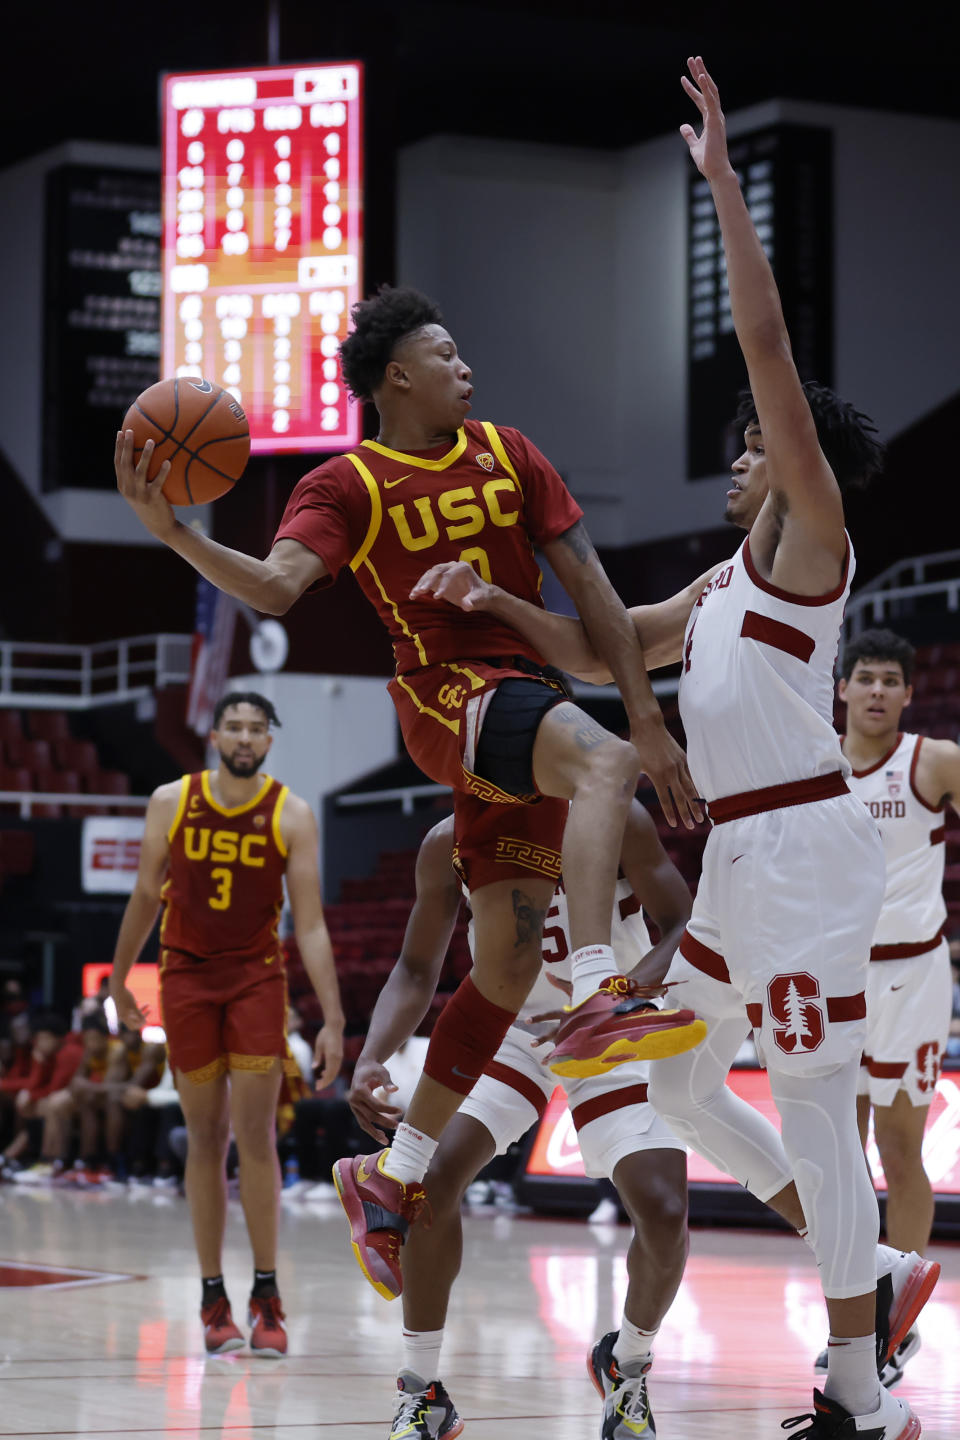 Southern California guard Boogie Ellis (0), left, drives for the basket as Stanford forward Spencer Jones (14), right, defends during the first half of an NCAA college basketball game Tuesday, Jan. 11, 2022, in Stanford, Calif. (AP Photo/Josie Lepe)